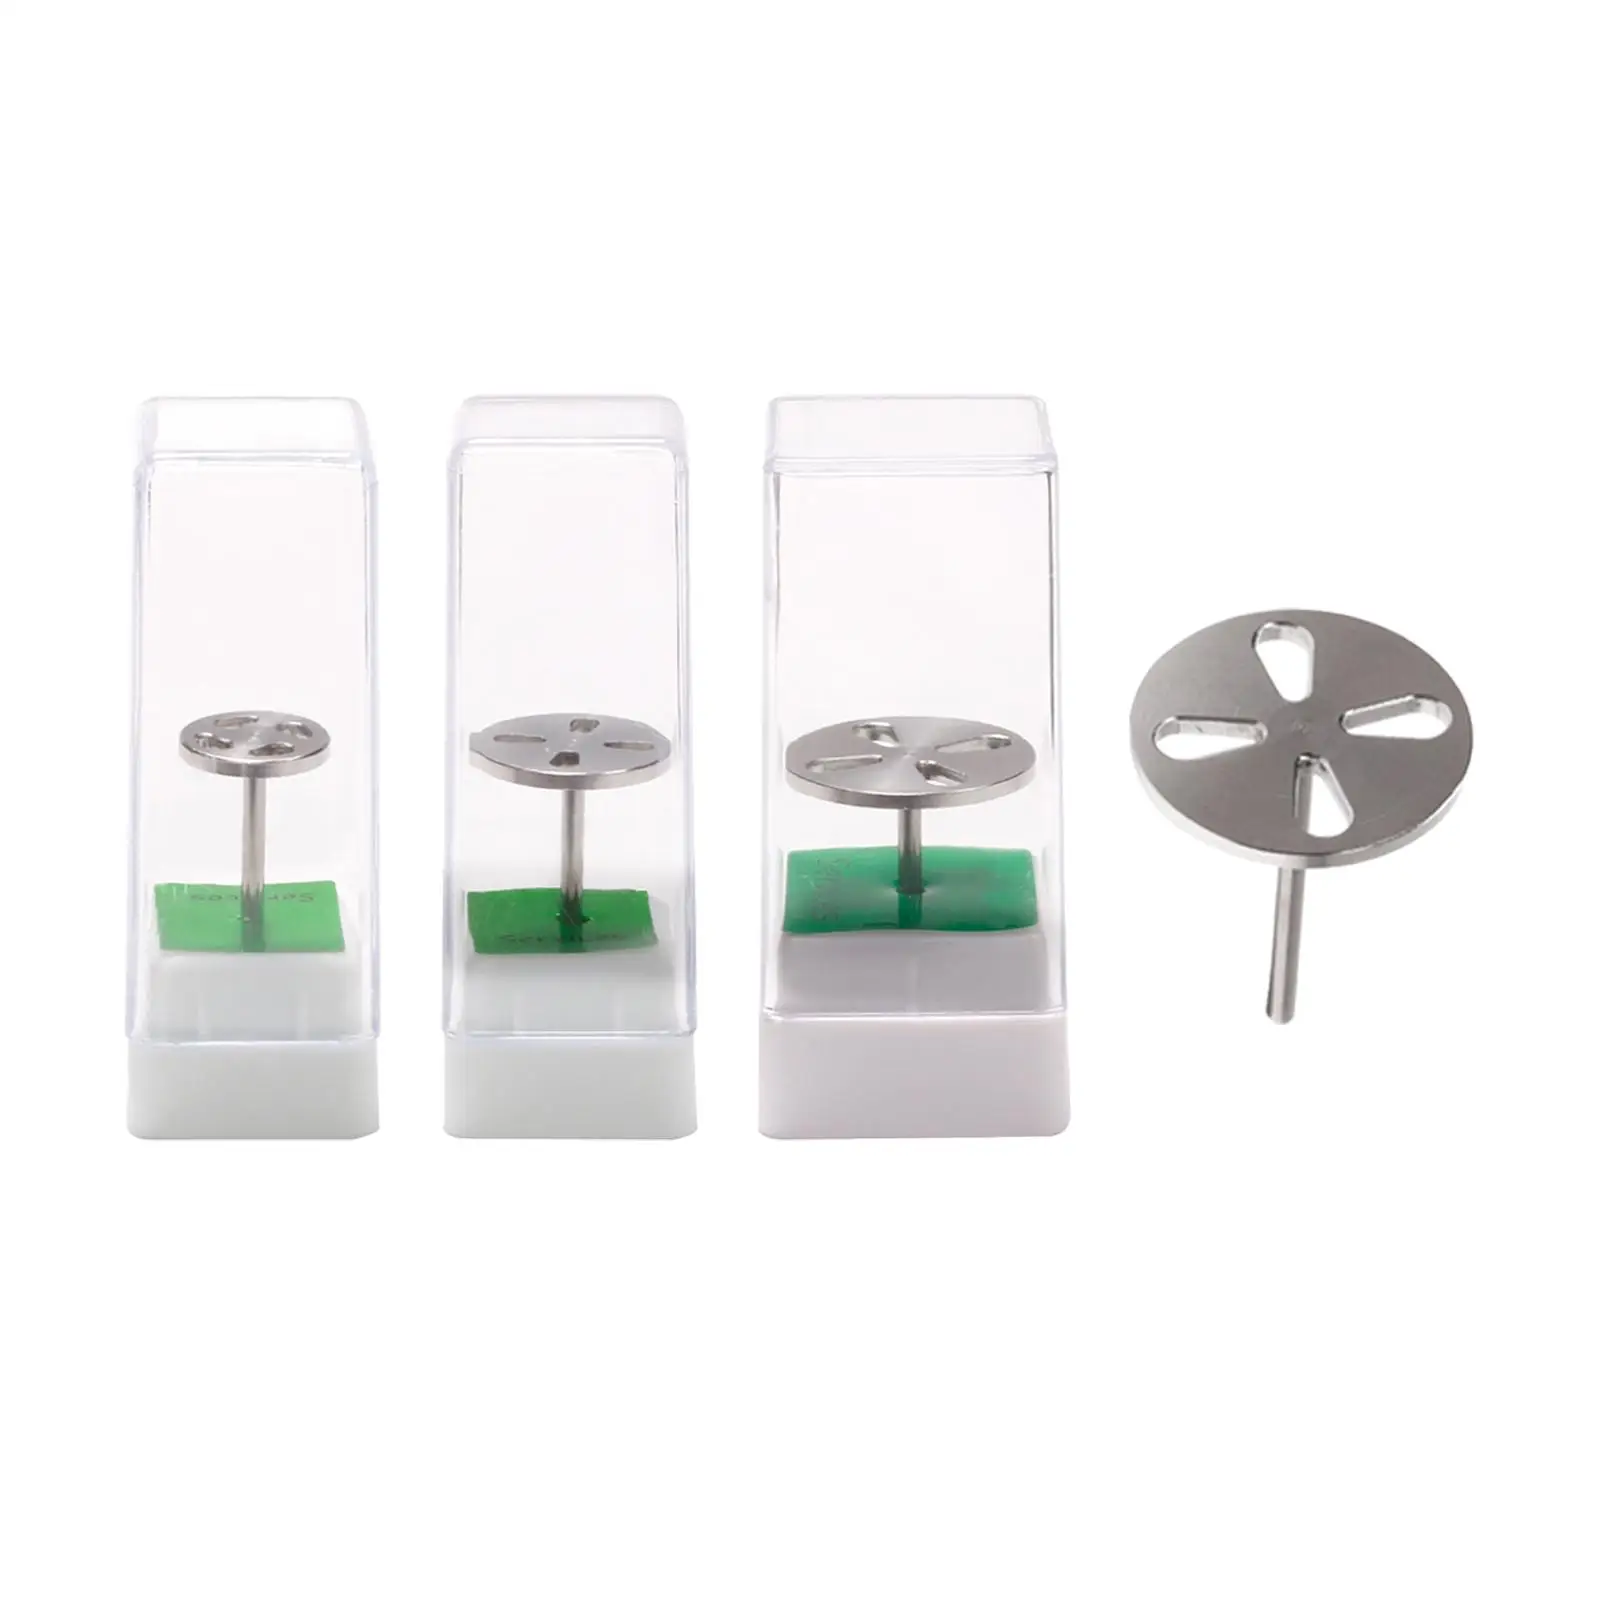 Stainless Steel Sanding Disc Sanding Disk Polishing Tool Replacement for Electric file skin Quick Shortening Nails